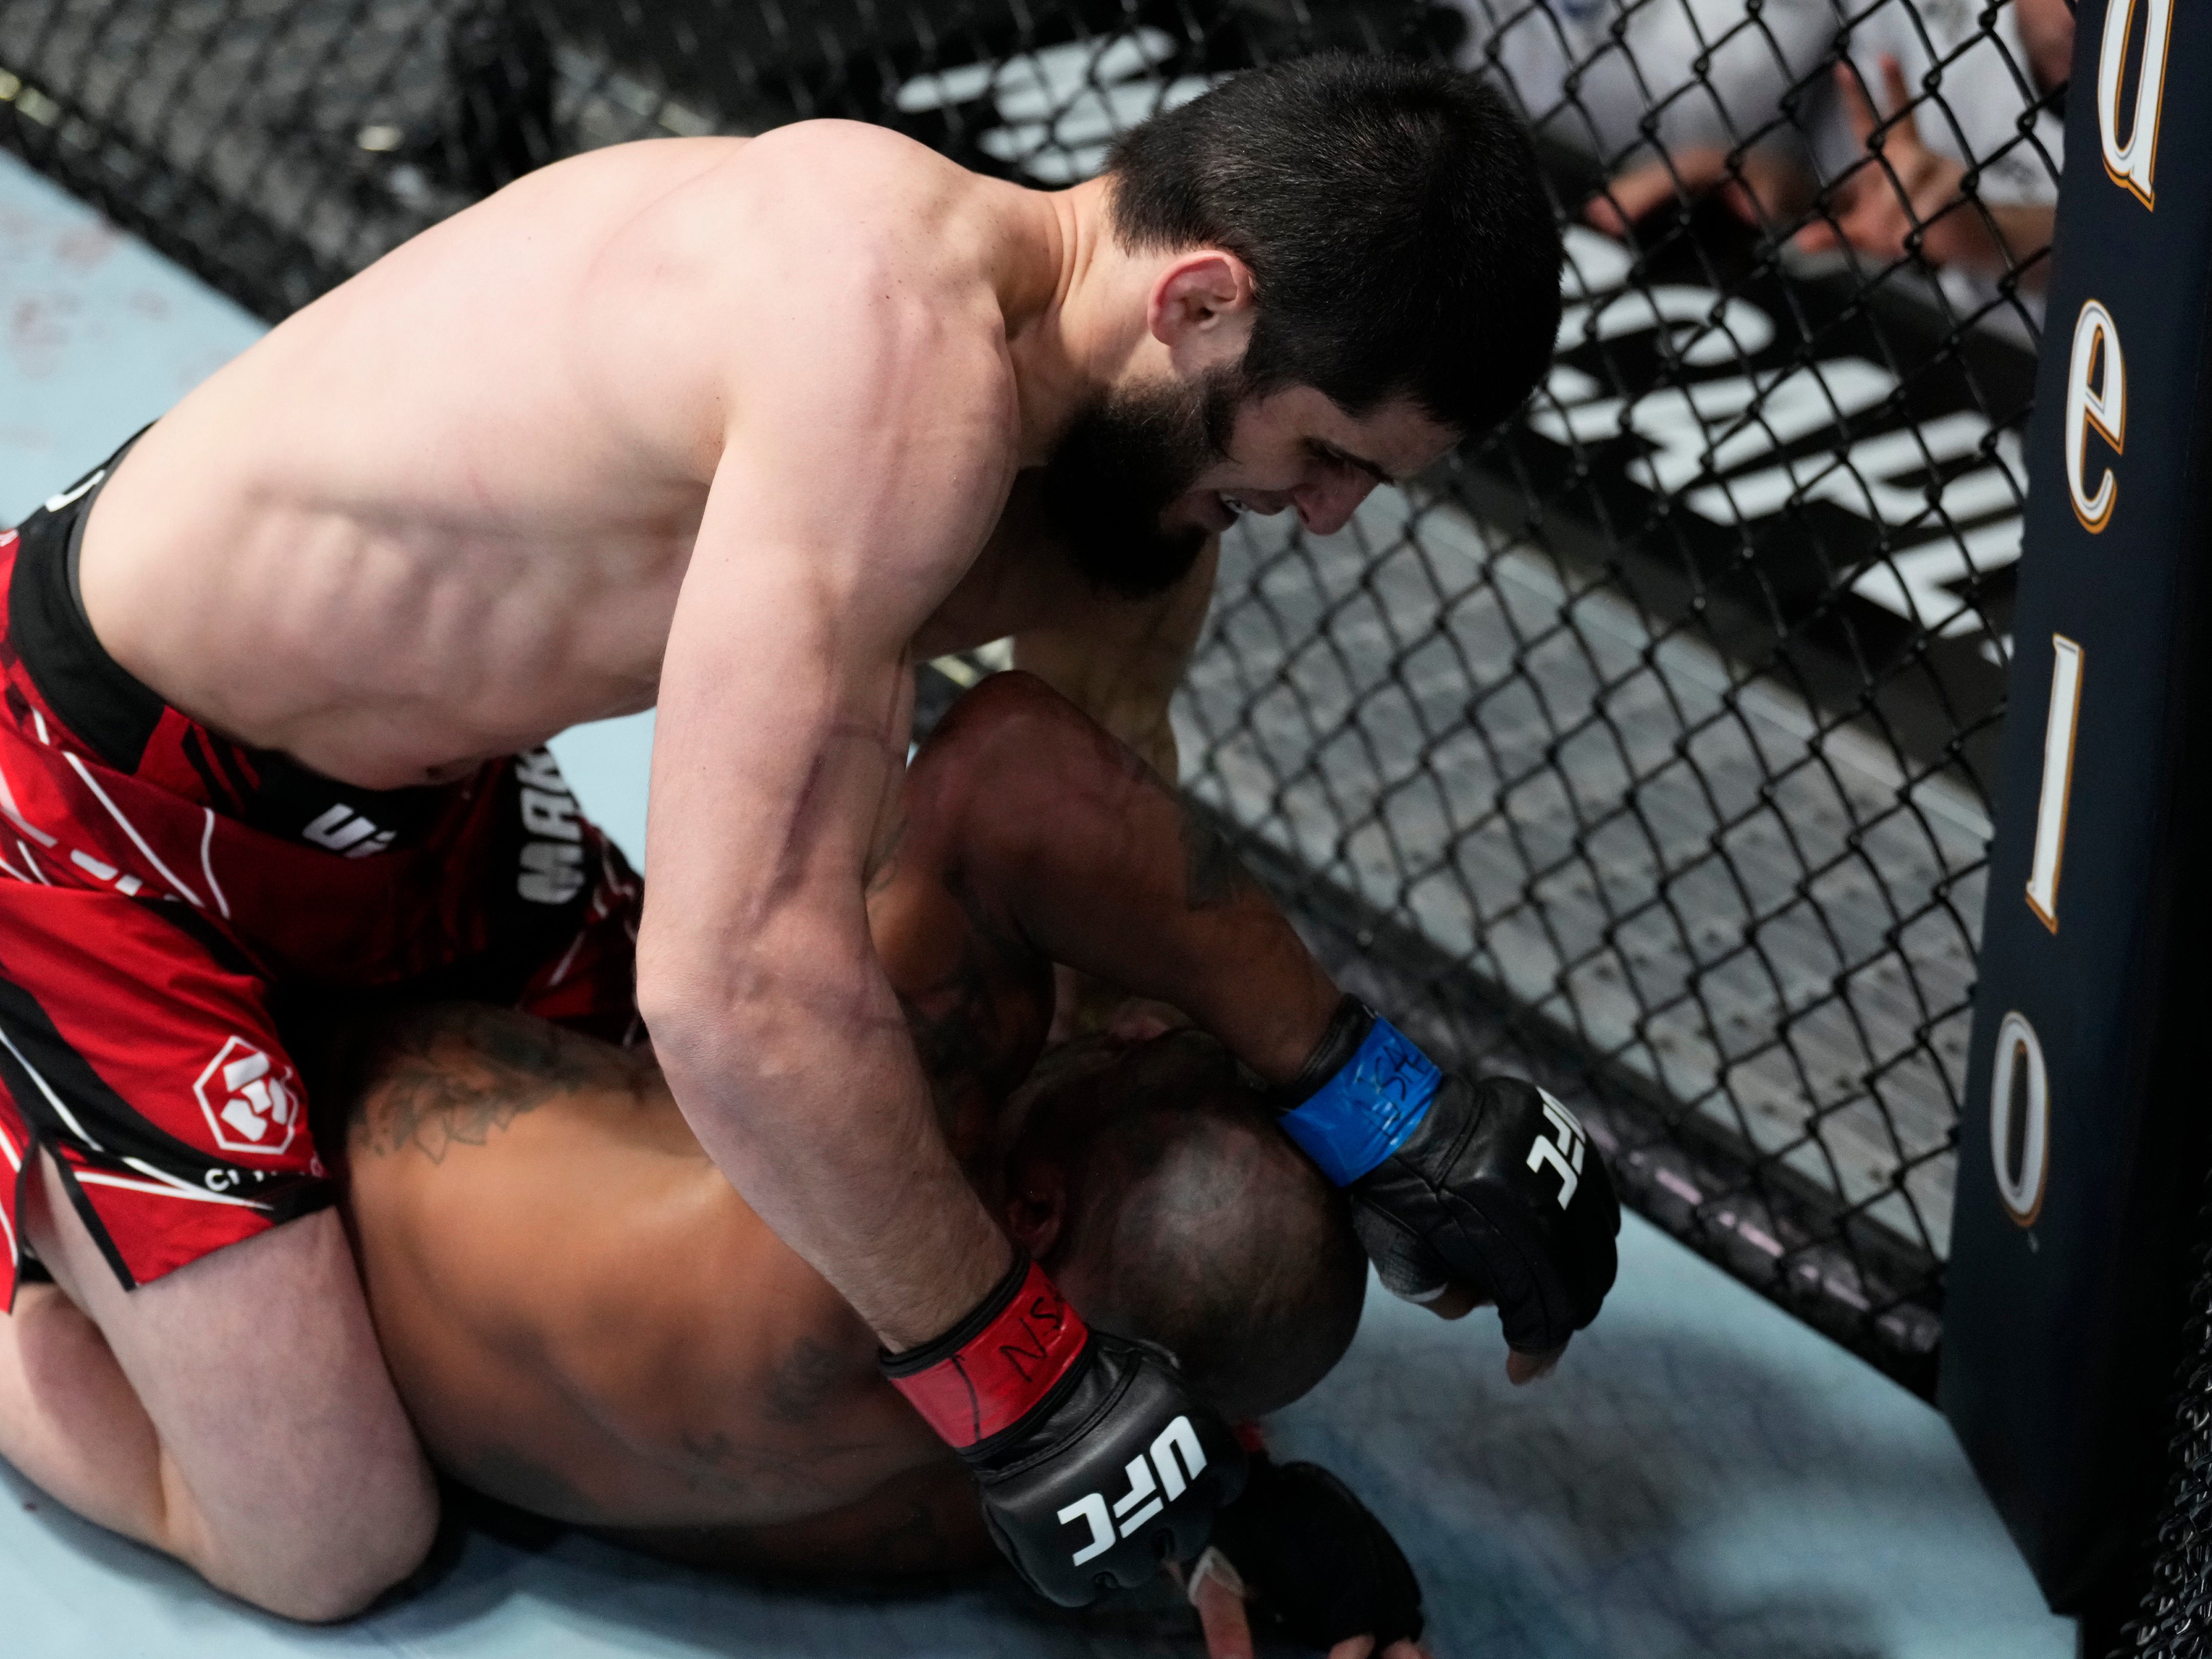 Islam Makhachev secured a first-round win against Bobby Ground with heavy ground and pound